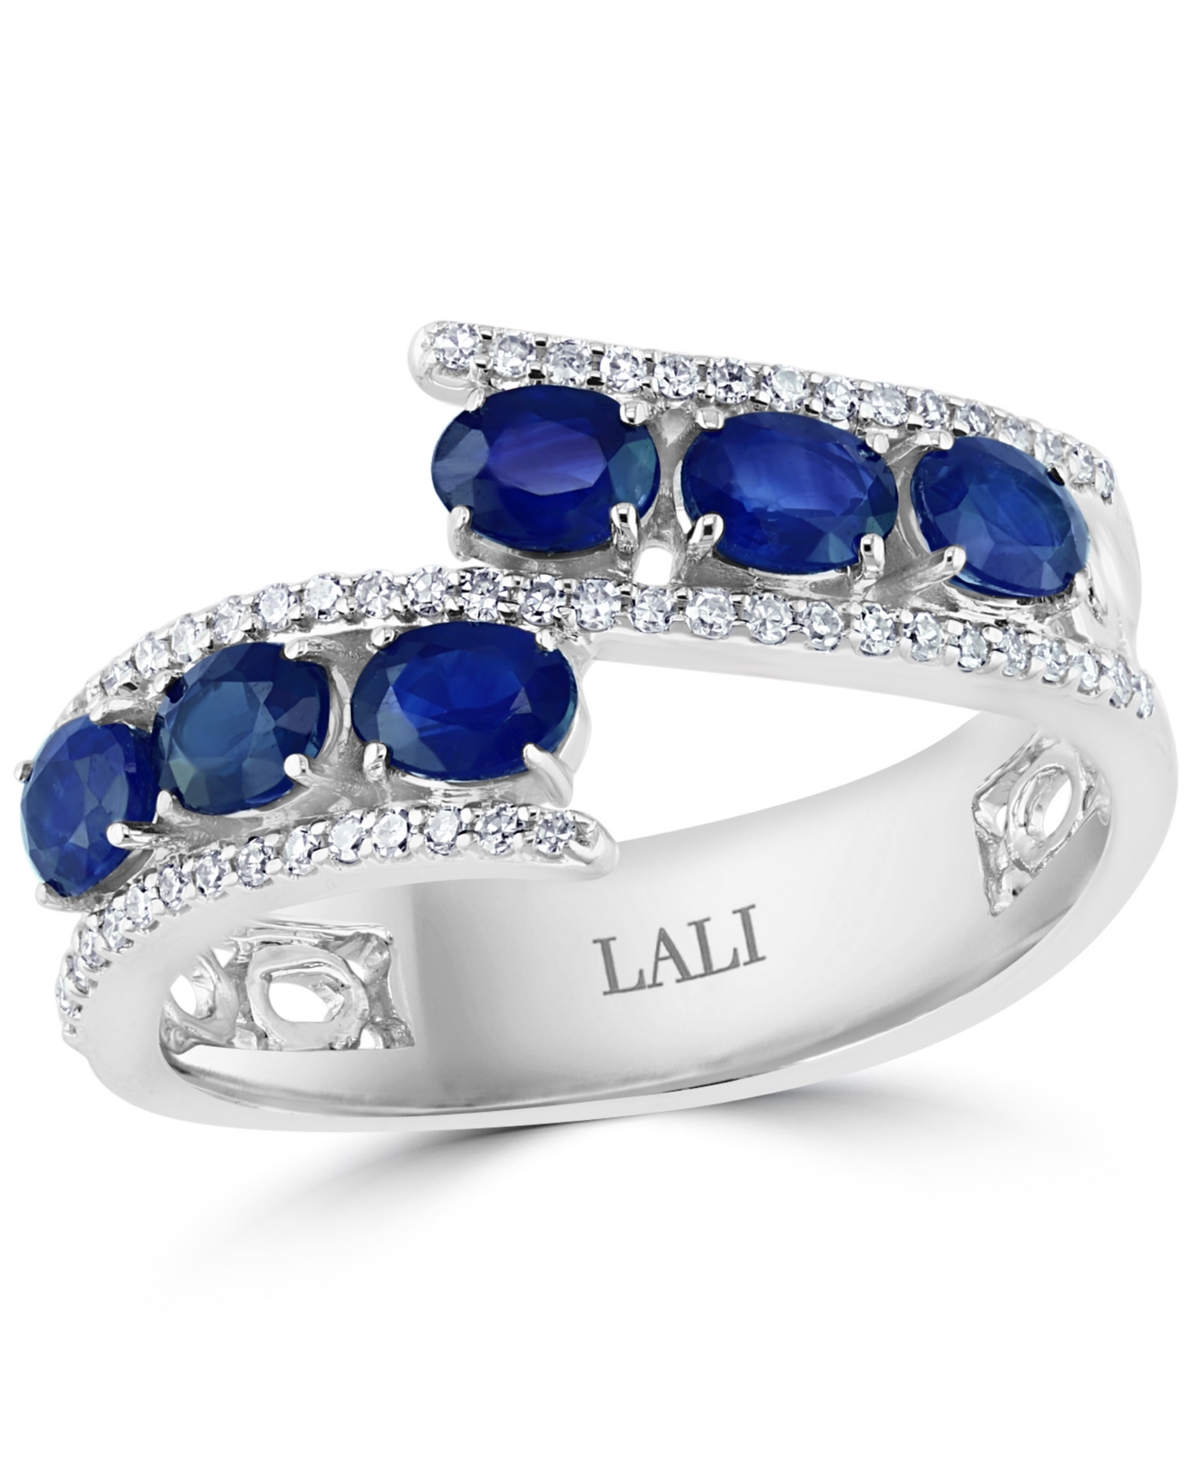 Sapphire (1-1/3 ct. t.w.) & Diamond (1/5 ct. t.w.) Bypass Ring in 14k White Gold - Sapphire